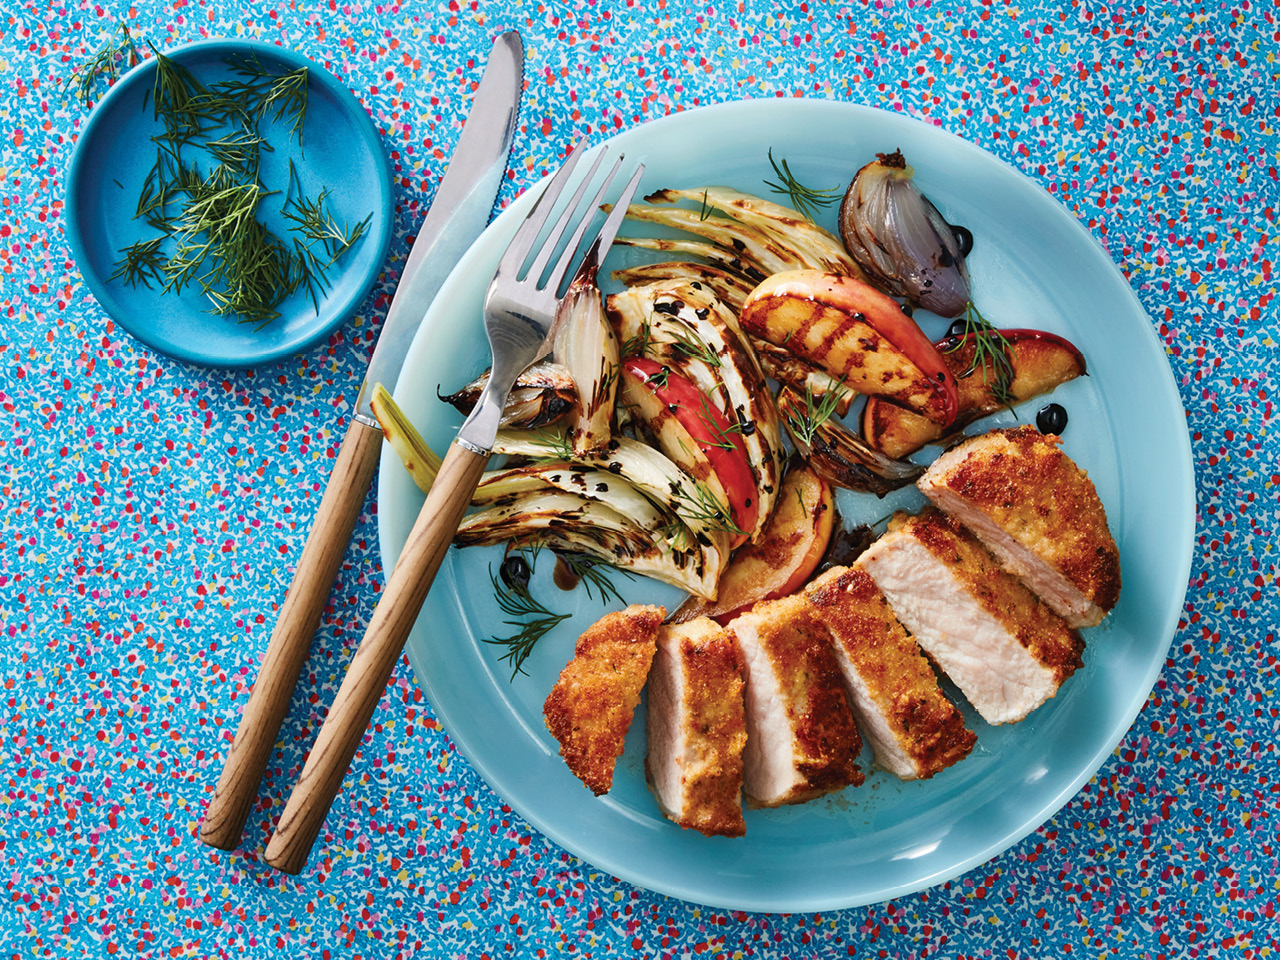 Pan-Fried Pork Chops with Roasted Apple and Fennel